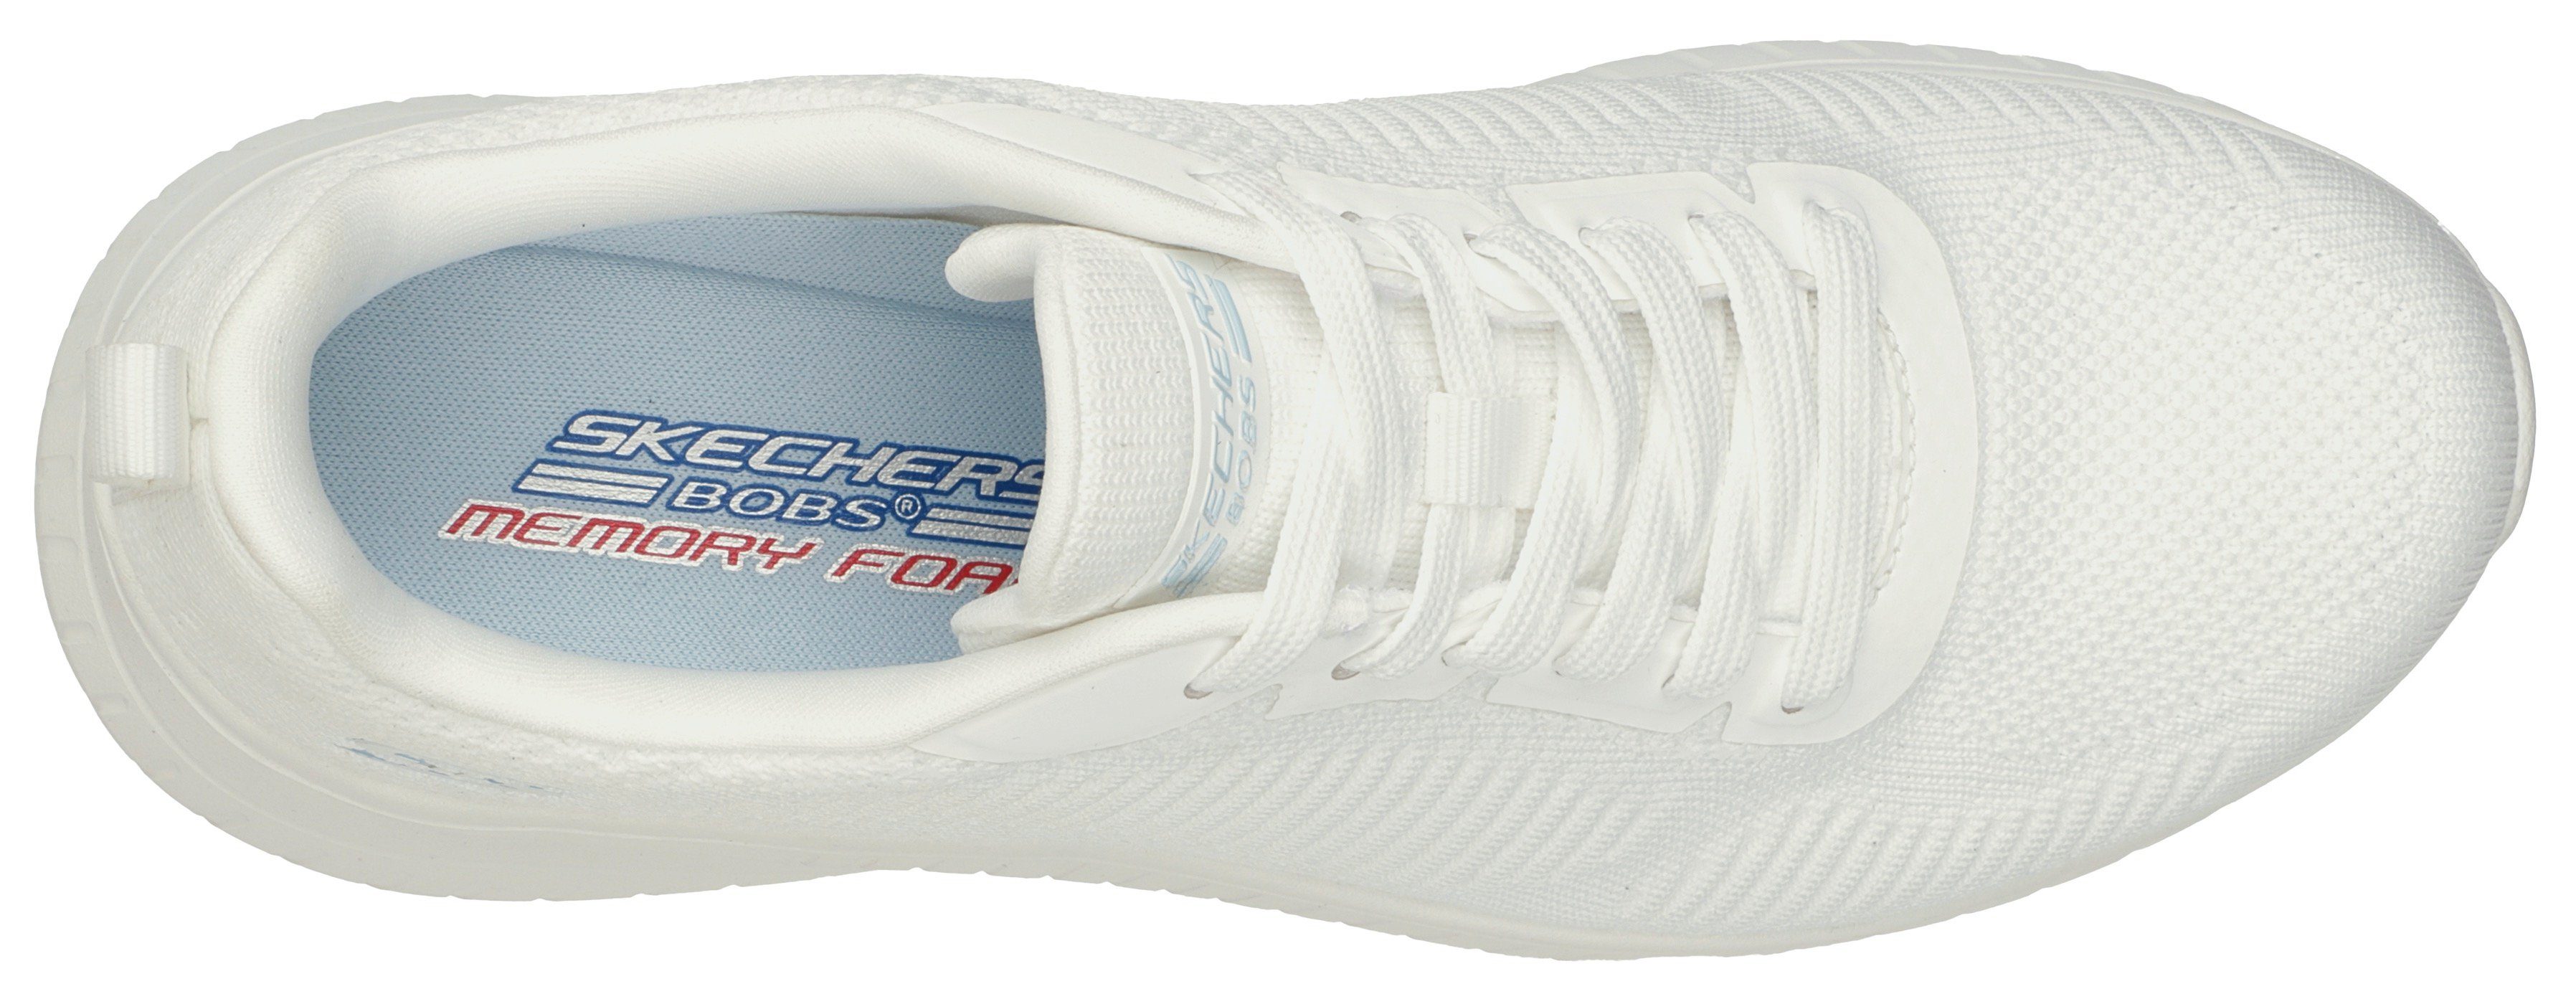 SQUAD FACE OFF Innensohle komfortabler BOBS Sneaker offwhite mit Skechers CHAOS